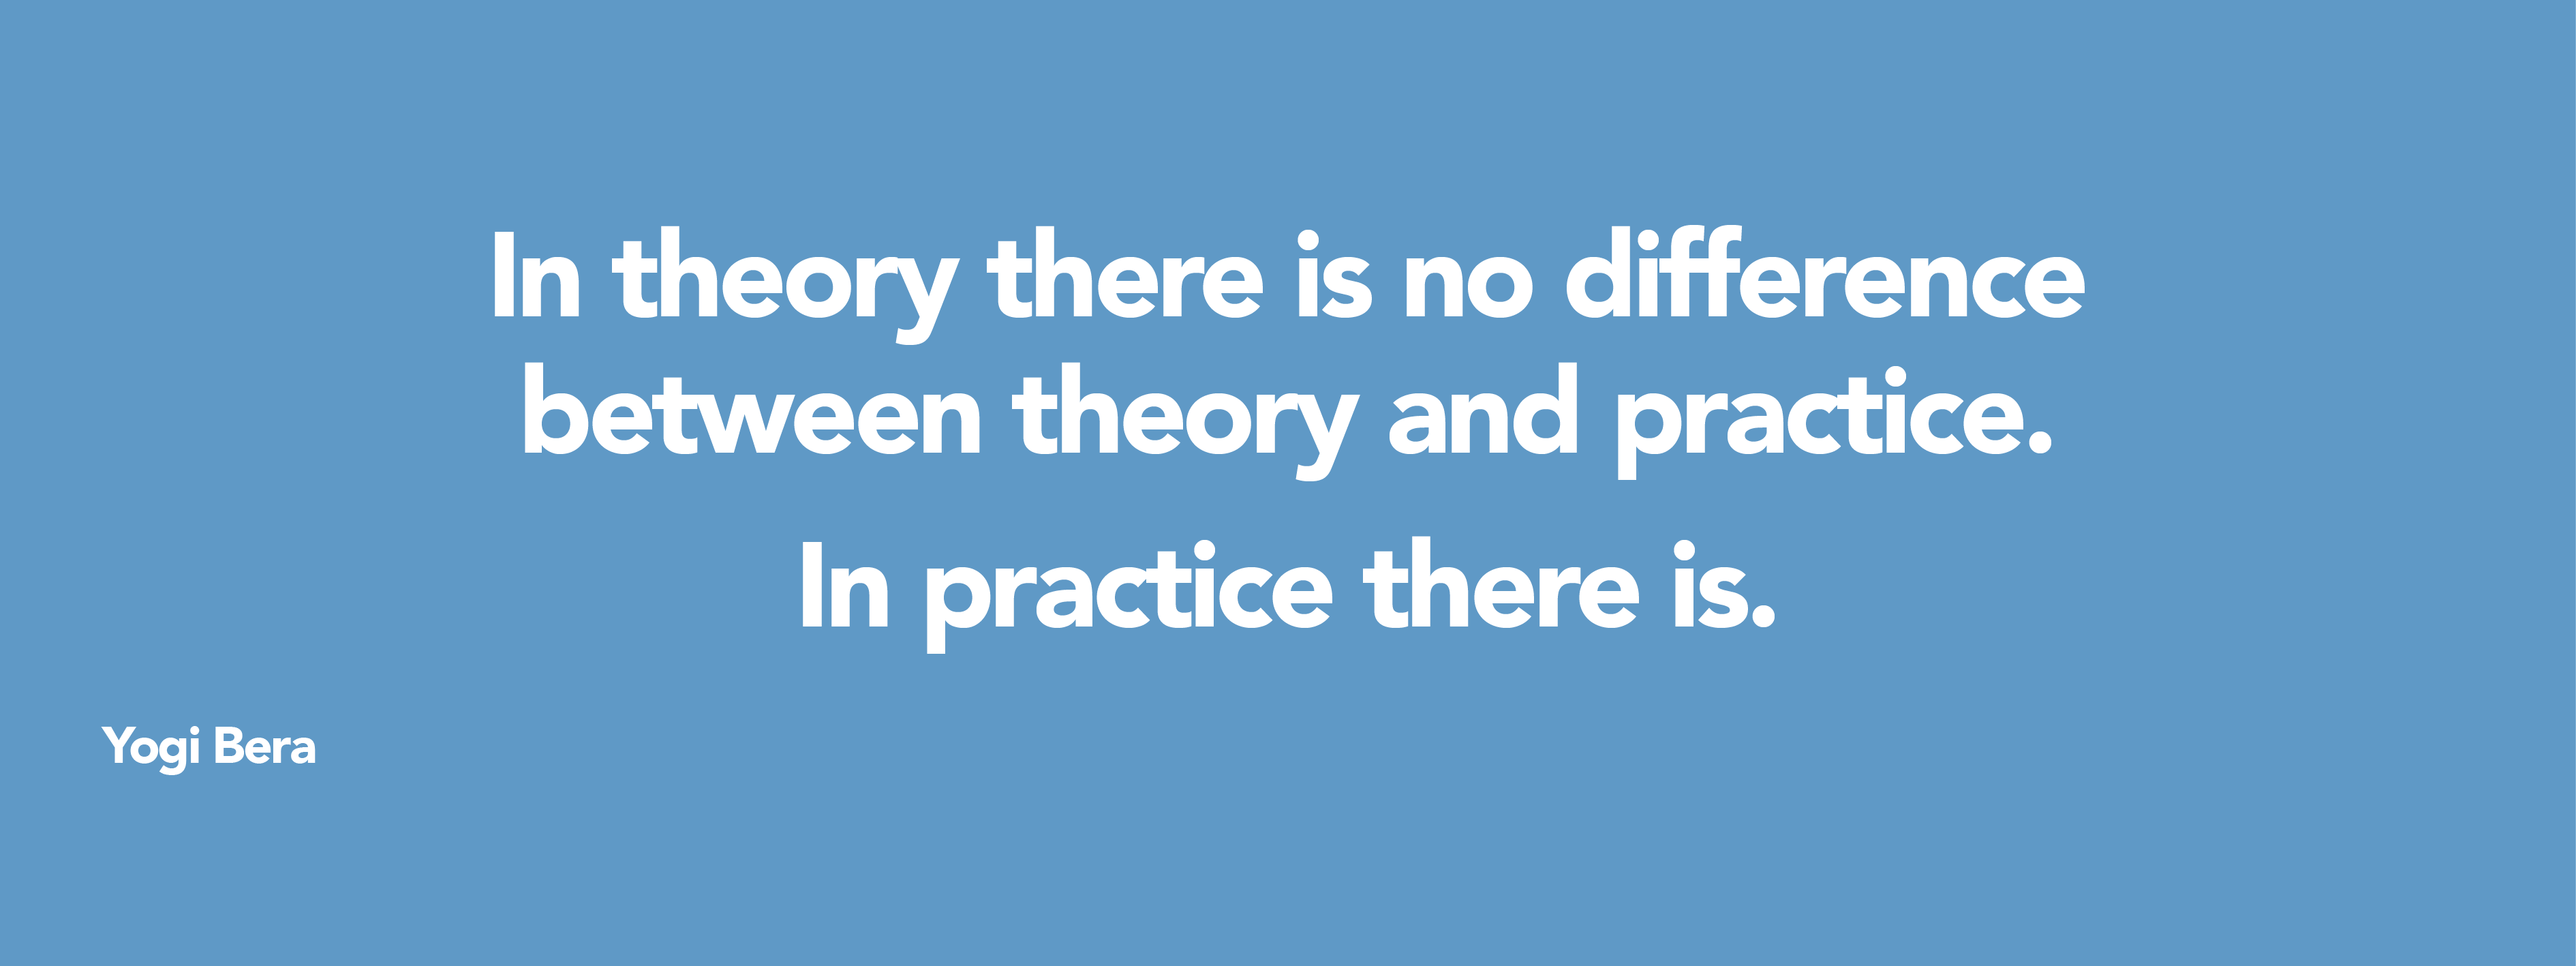 the difference between theory and practice